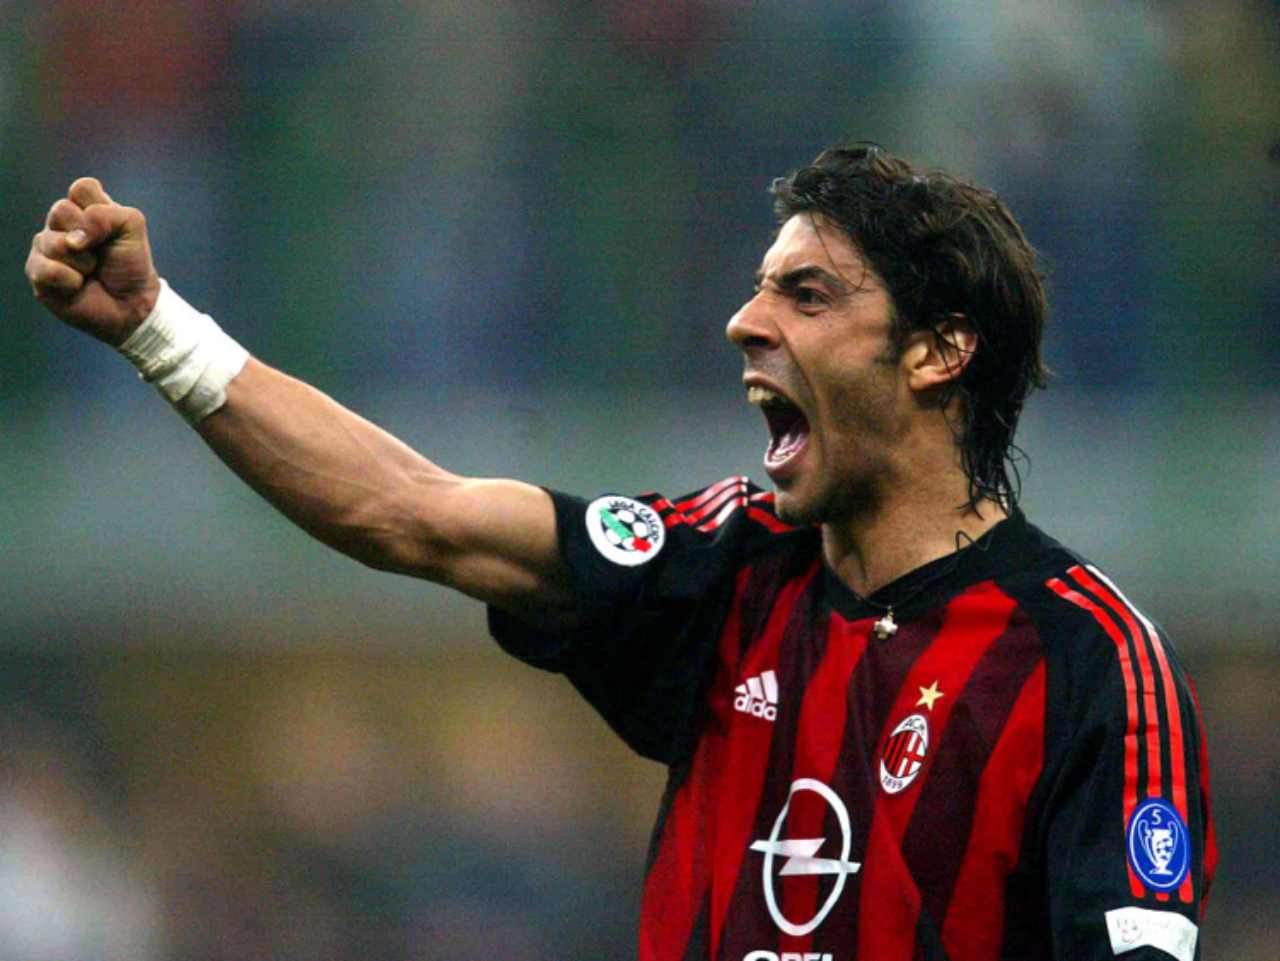  Rui Costa celebrates a goal while playing for AC Milan during a Serie A match.